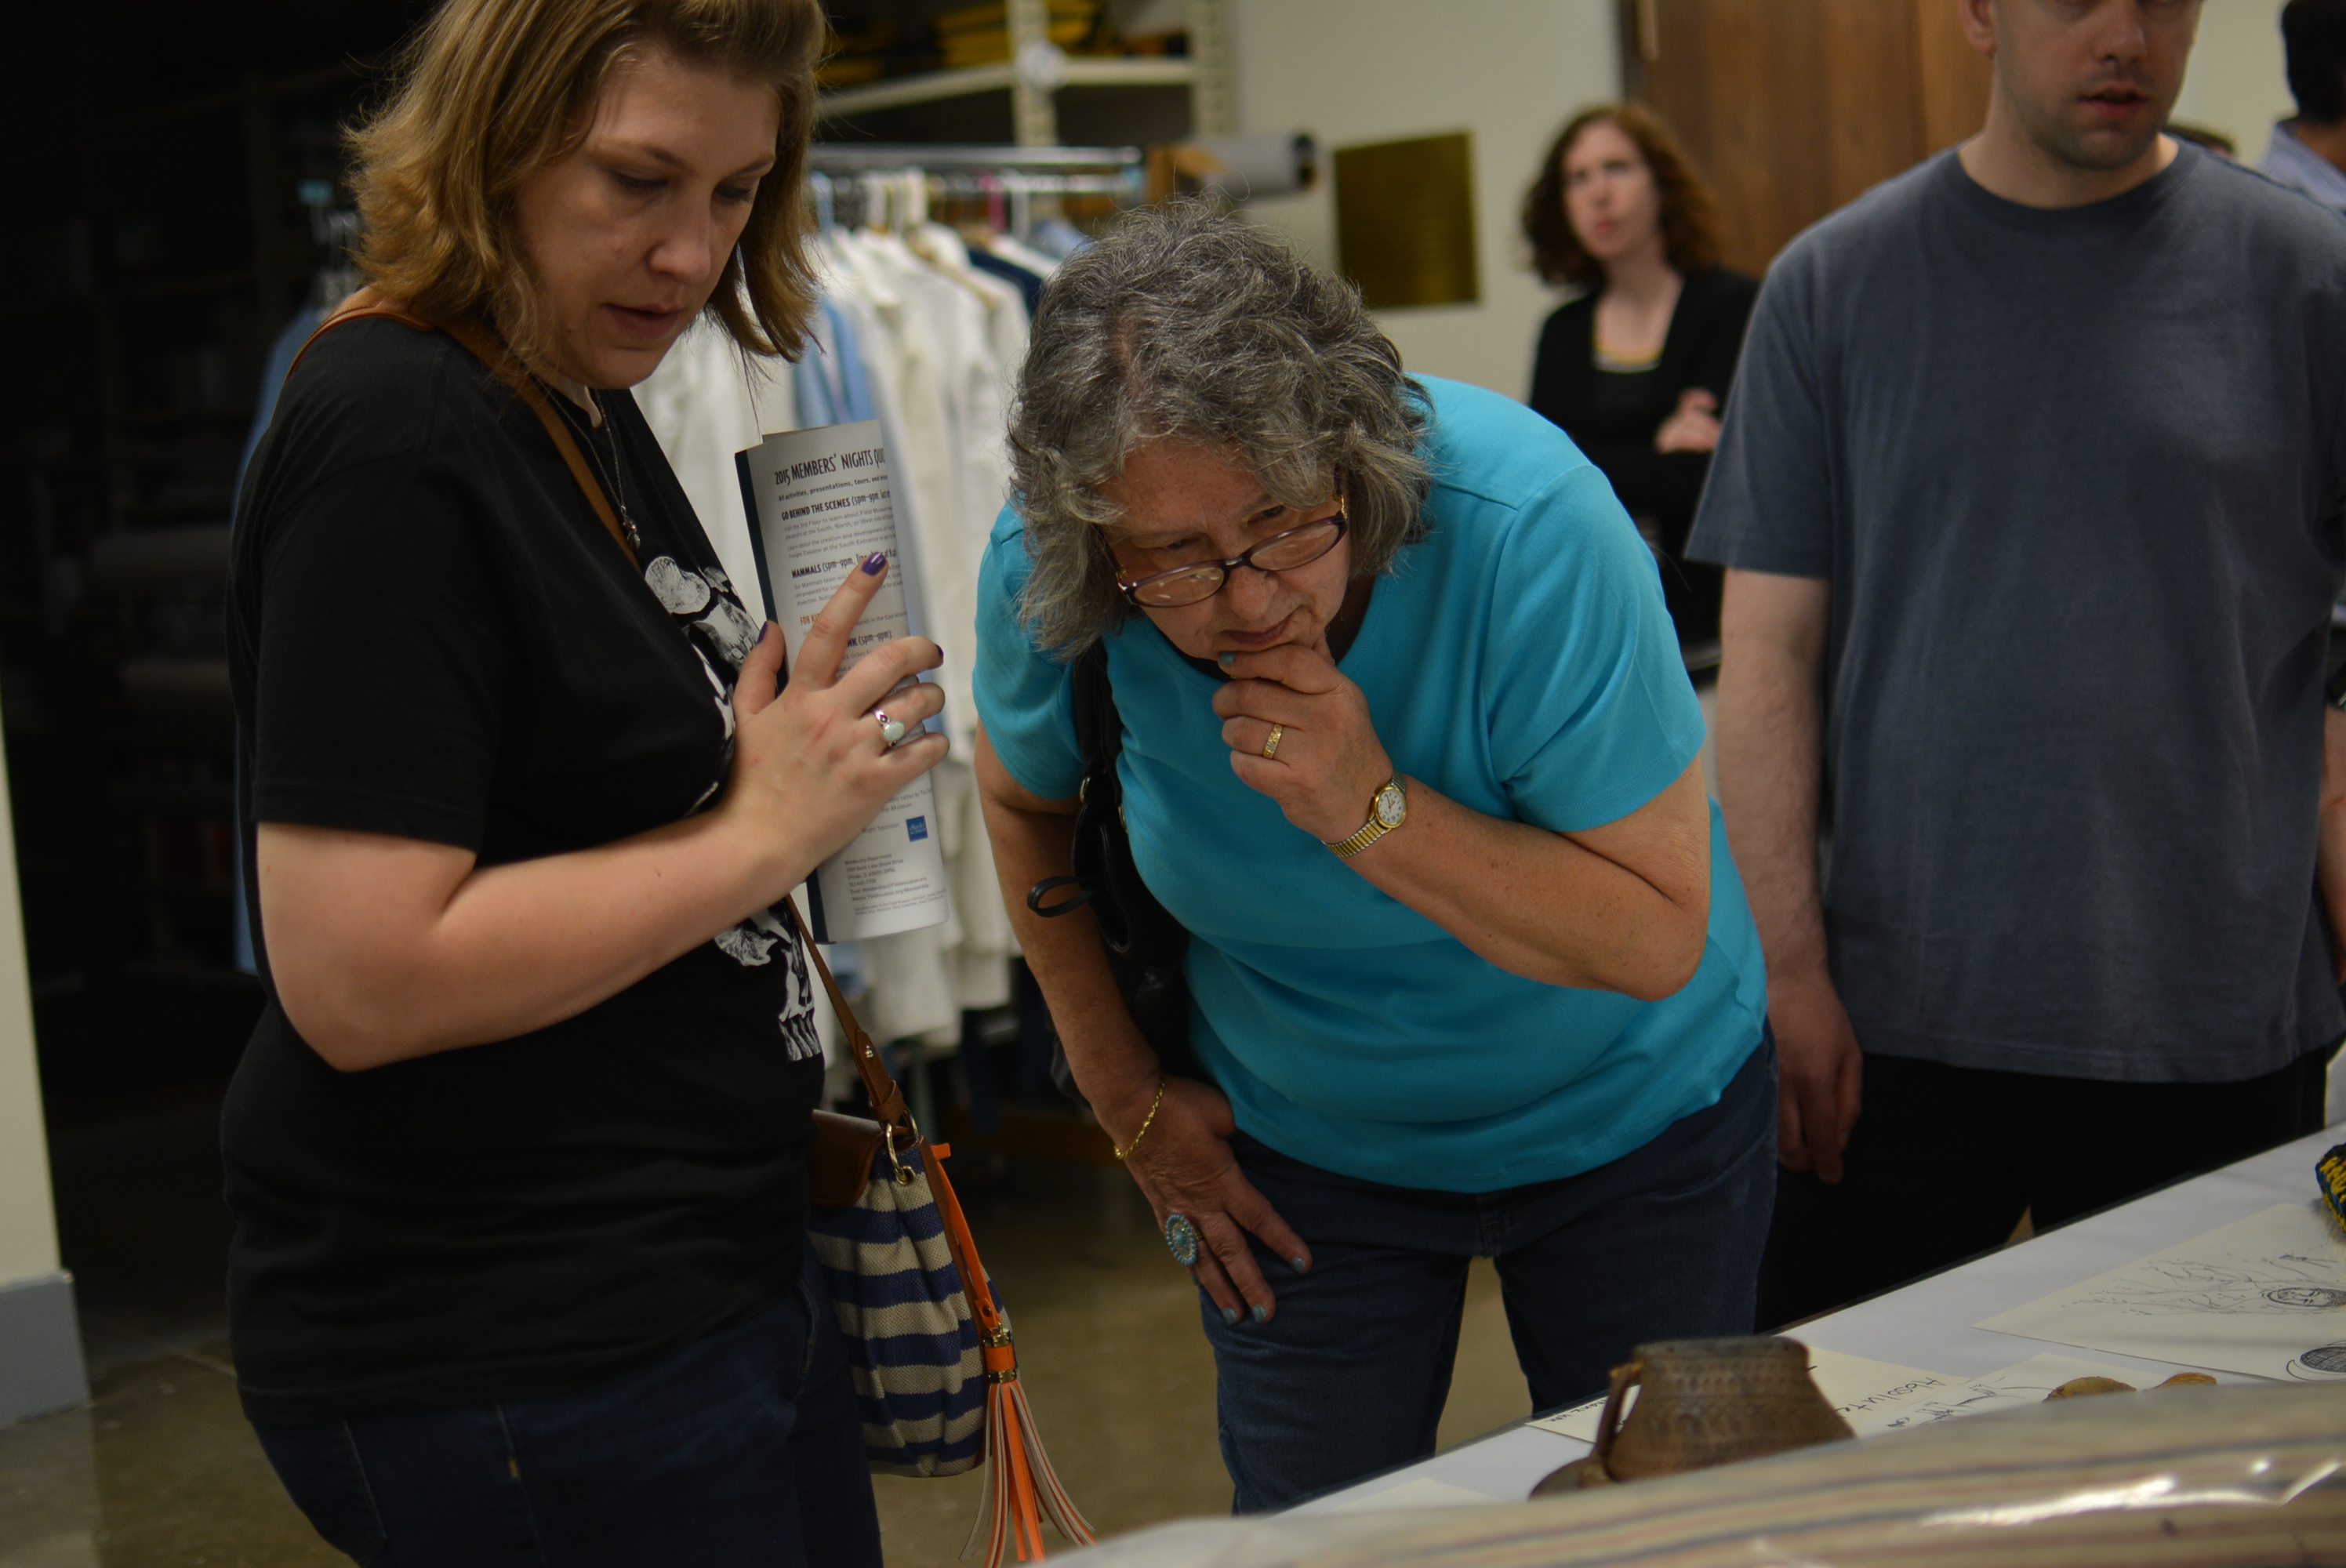 Guests get a closer look at the artwork and artifacts on display. (c) Field Museum of Natural History - CC BY-NC 4.0